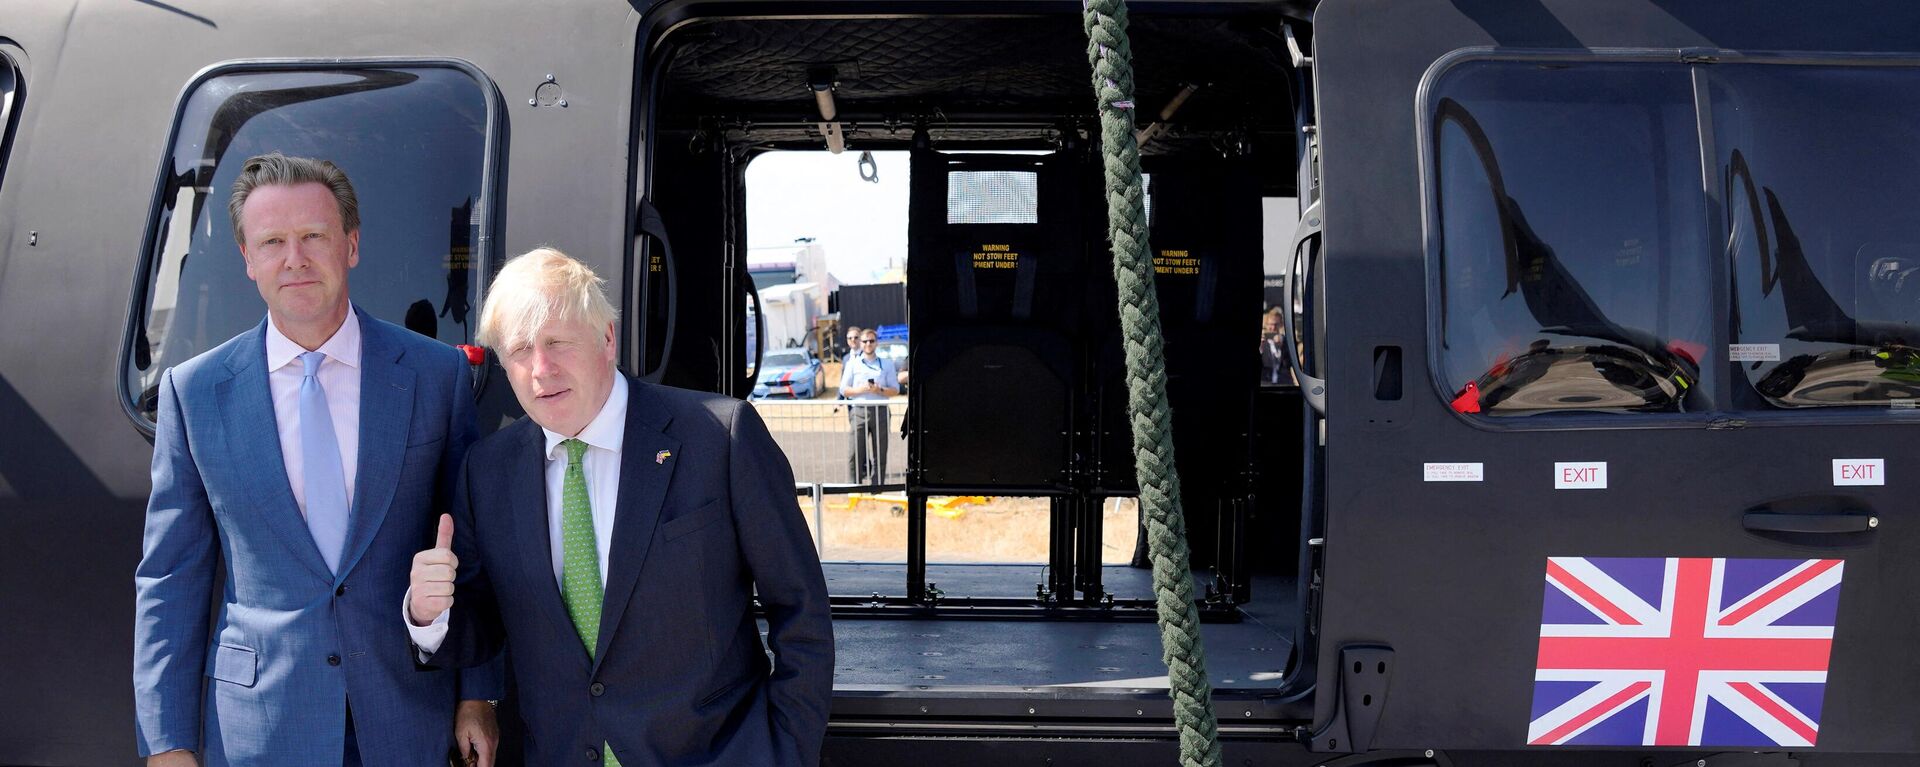 Britain's Prime Minister Boris Johnson gestures in front of an helicopter as he visits the Farnborough Airshow, in Farnborough, on July 18, 2022. - Sputnik International, 1920, 18.07.2022